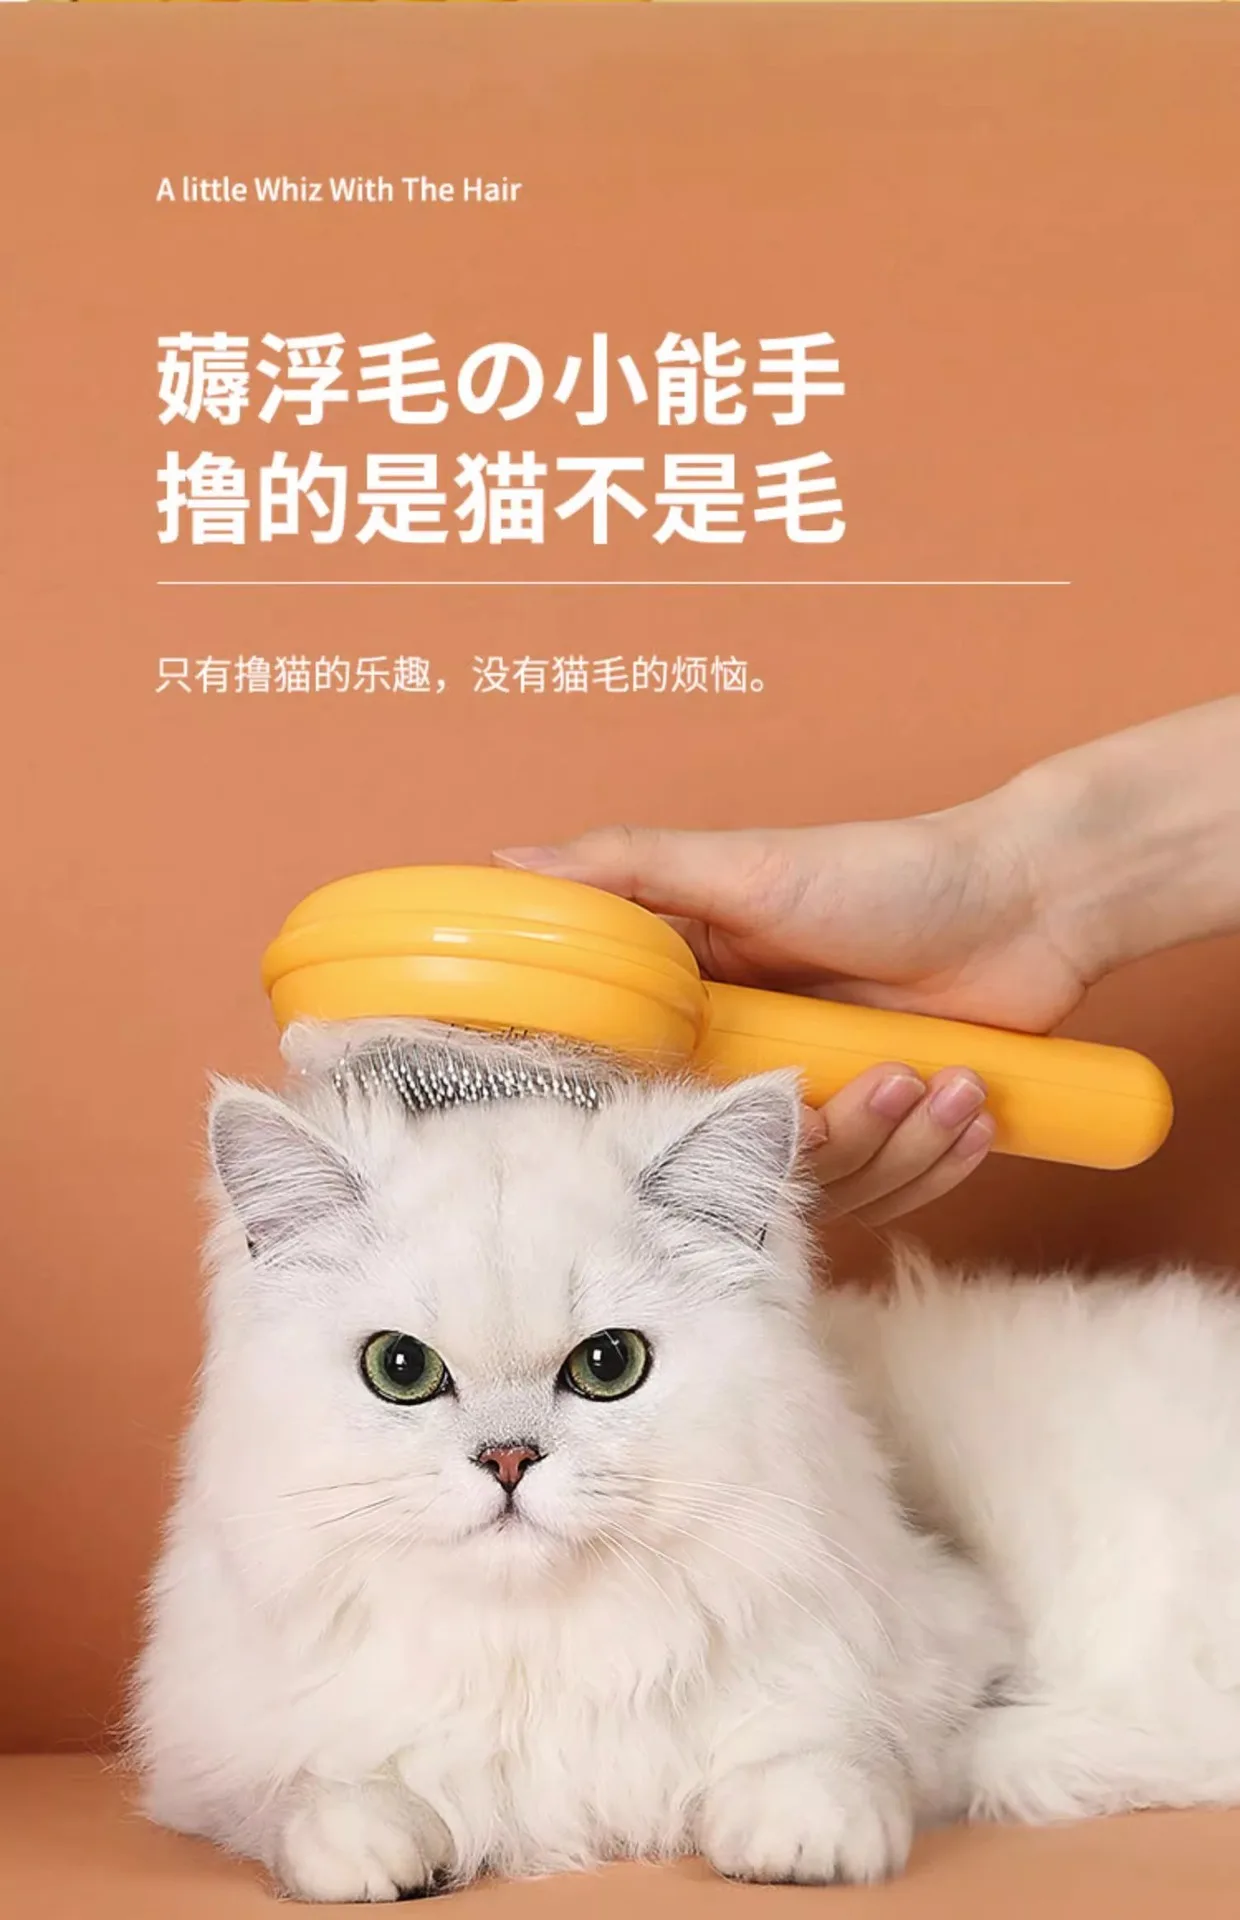 

Pet hair grooming tool, floating hair remover for cats and dogs, curved comb teeth, environmentally friendly and skin friendly